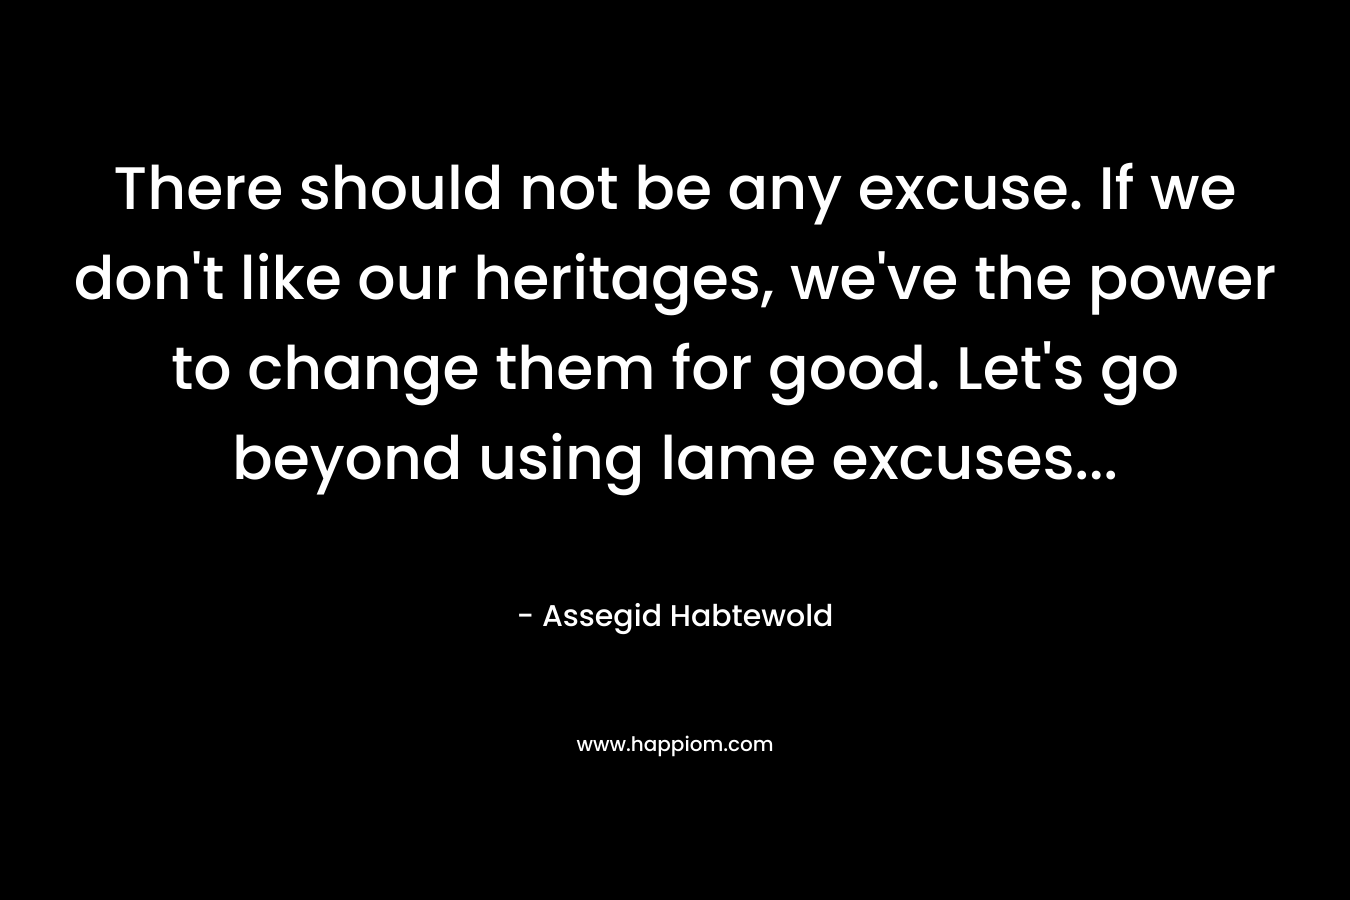 There should not be any excuse. If we don’t like our heritages, we’ve the power to change them for good. Let’s go beyond using lame excuses… – Assegid Habtewold